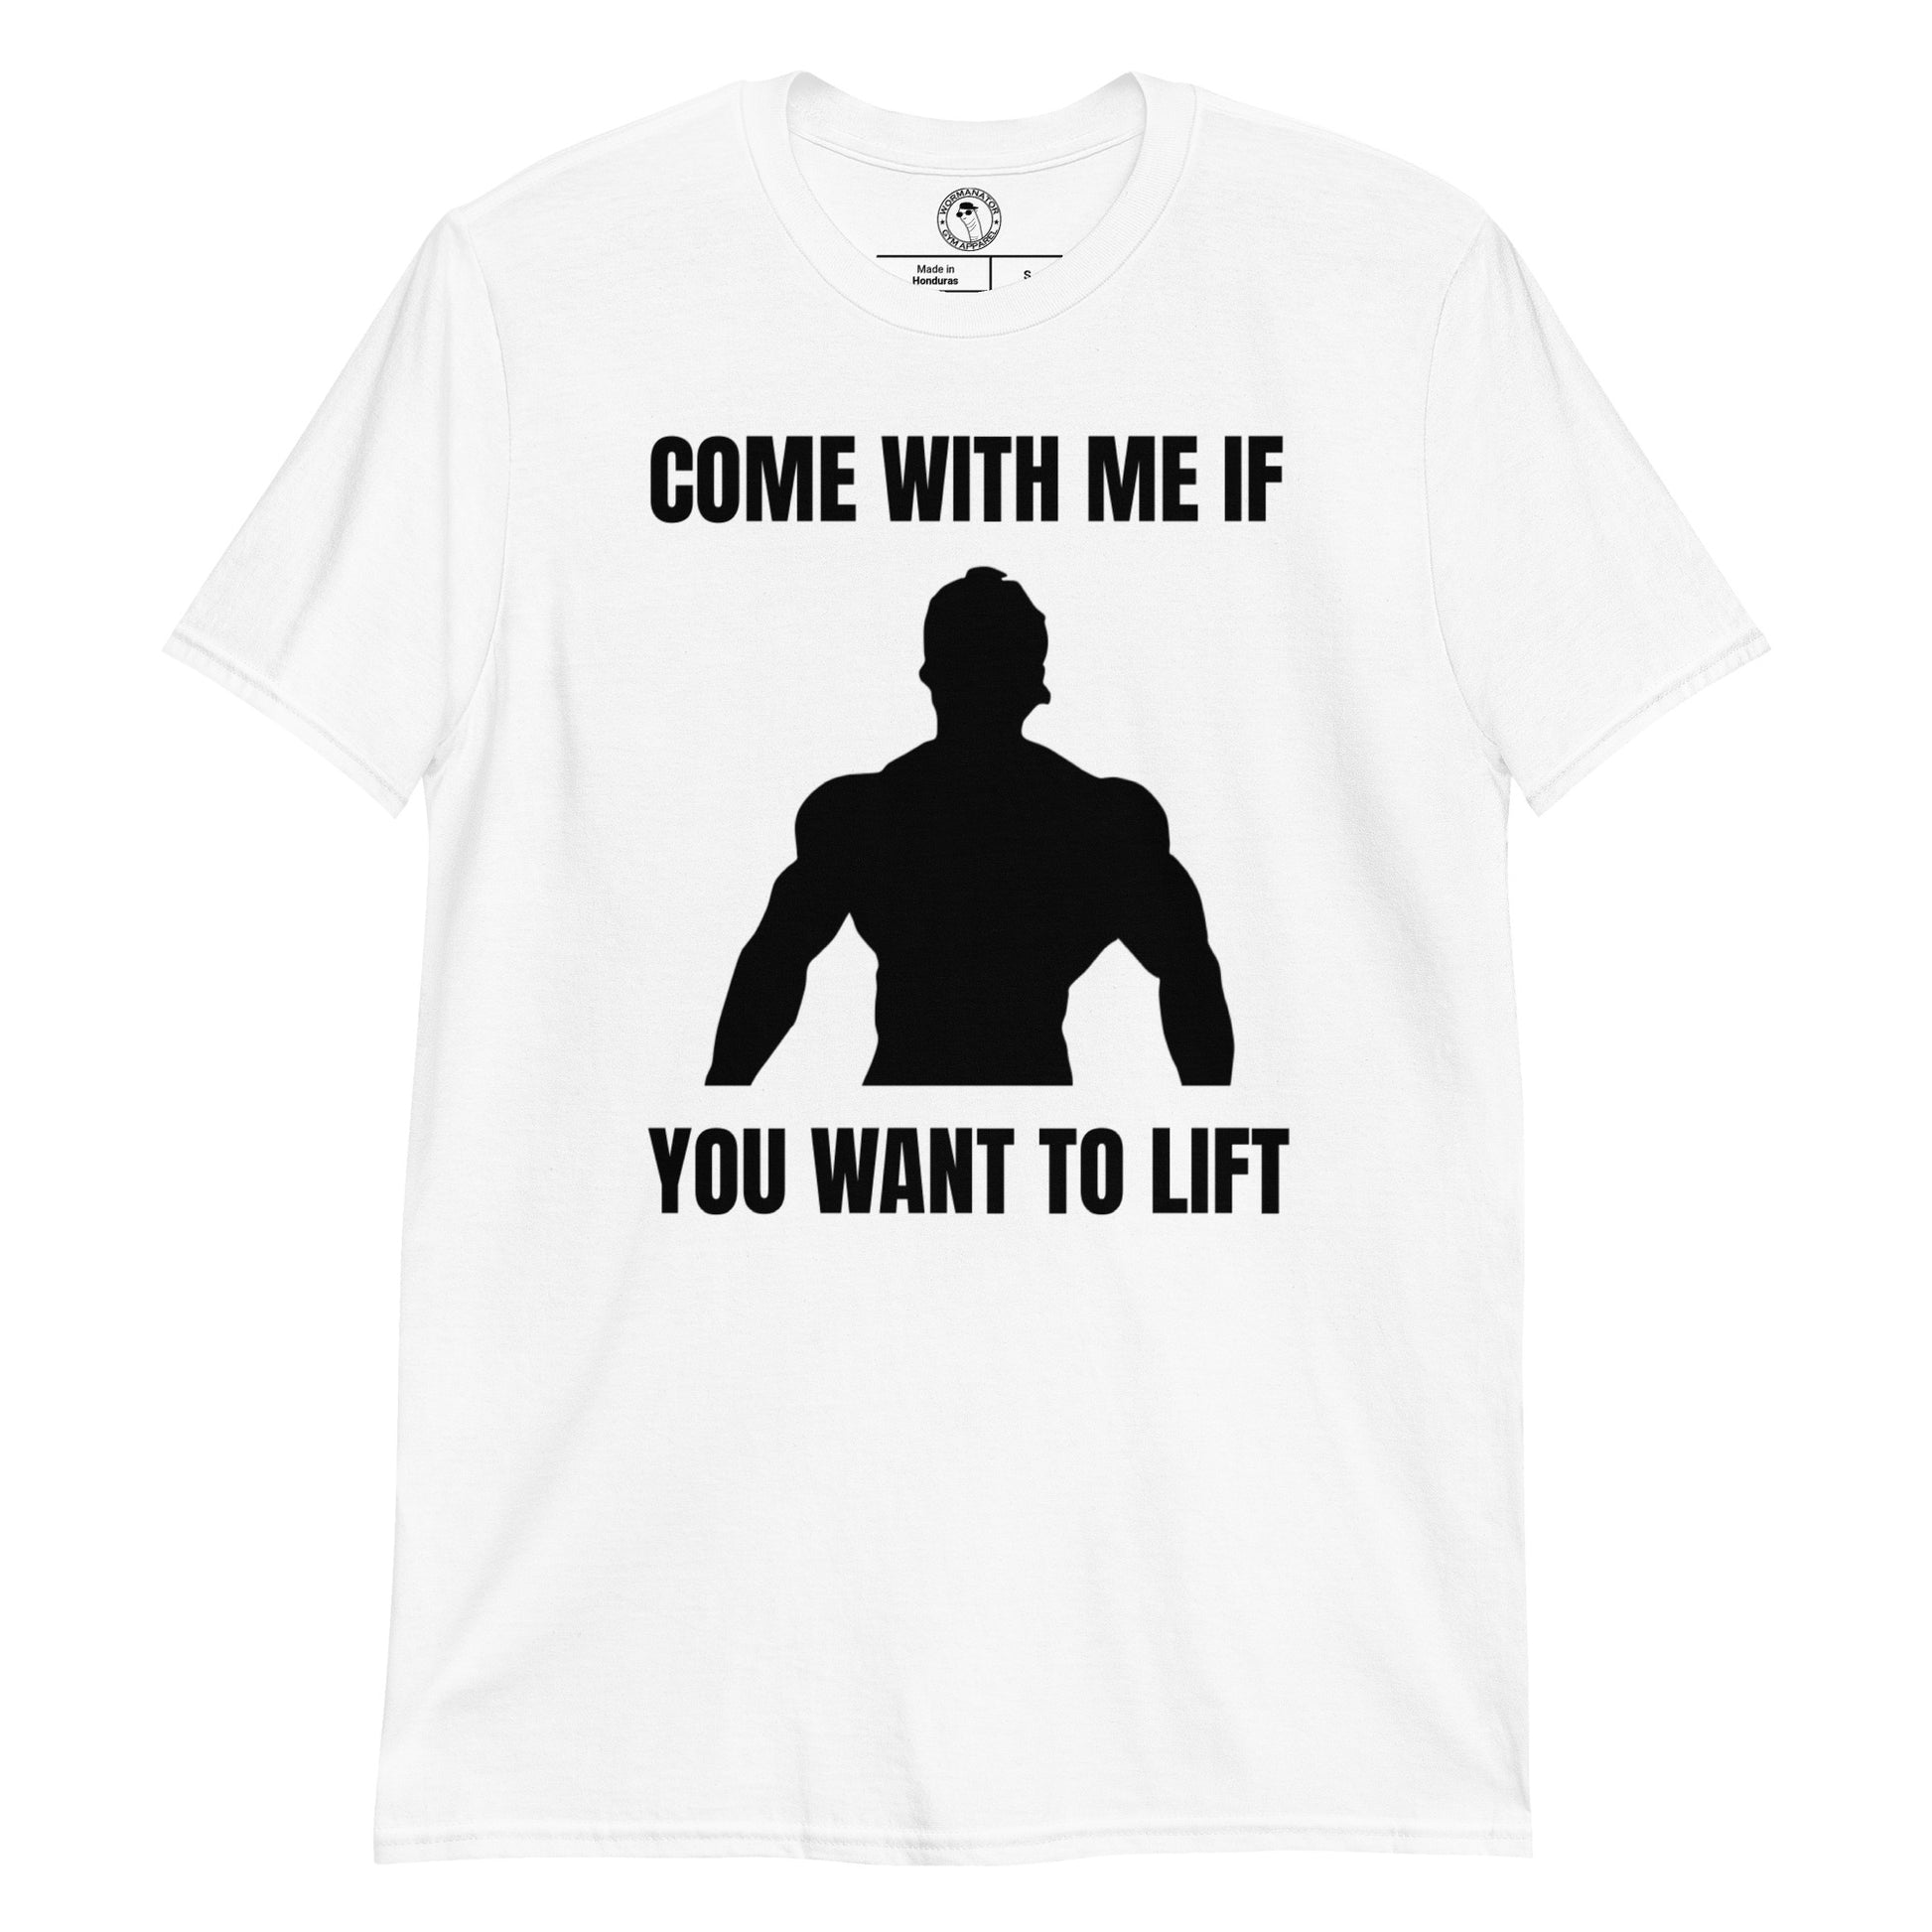 Come with Me if You Want to Lift Shirt in White